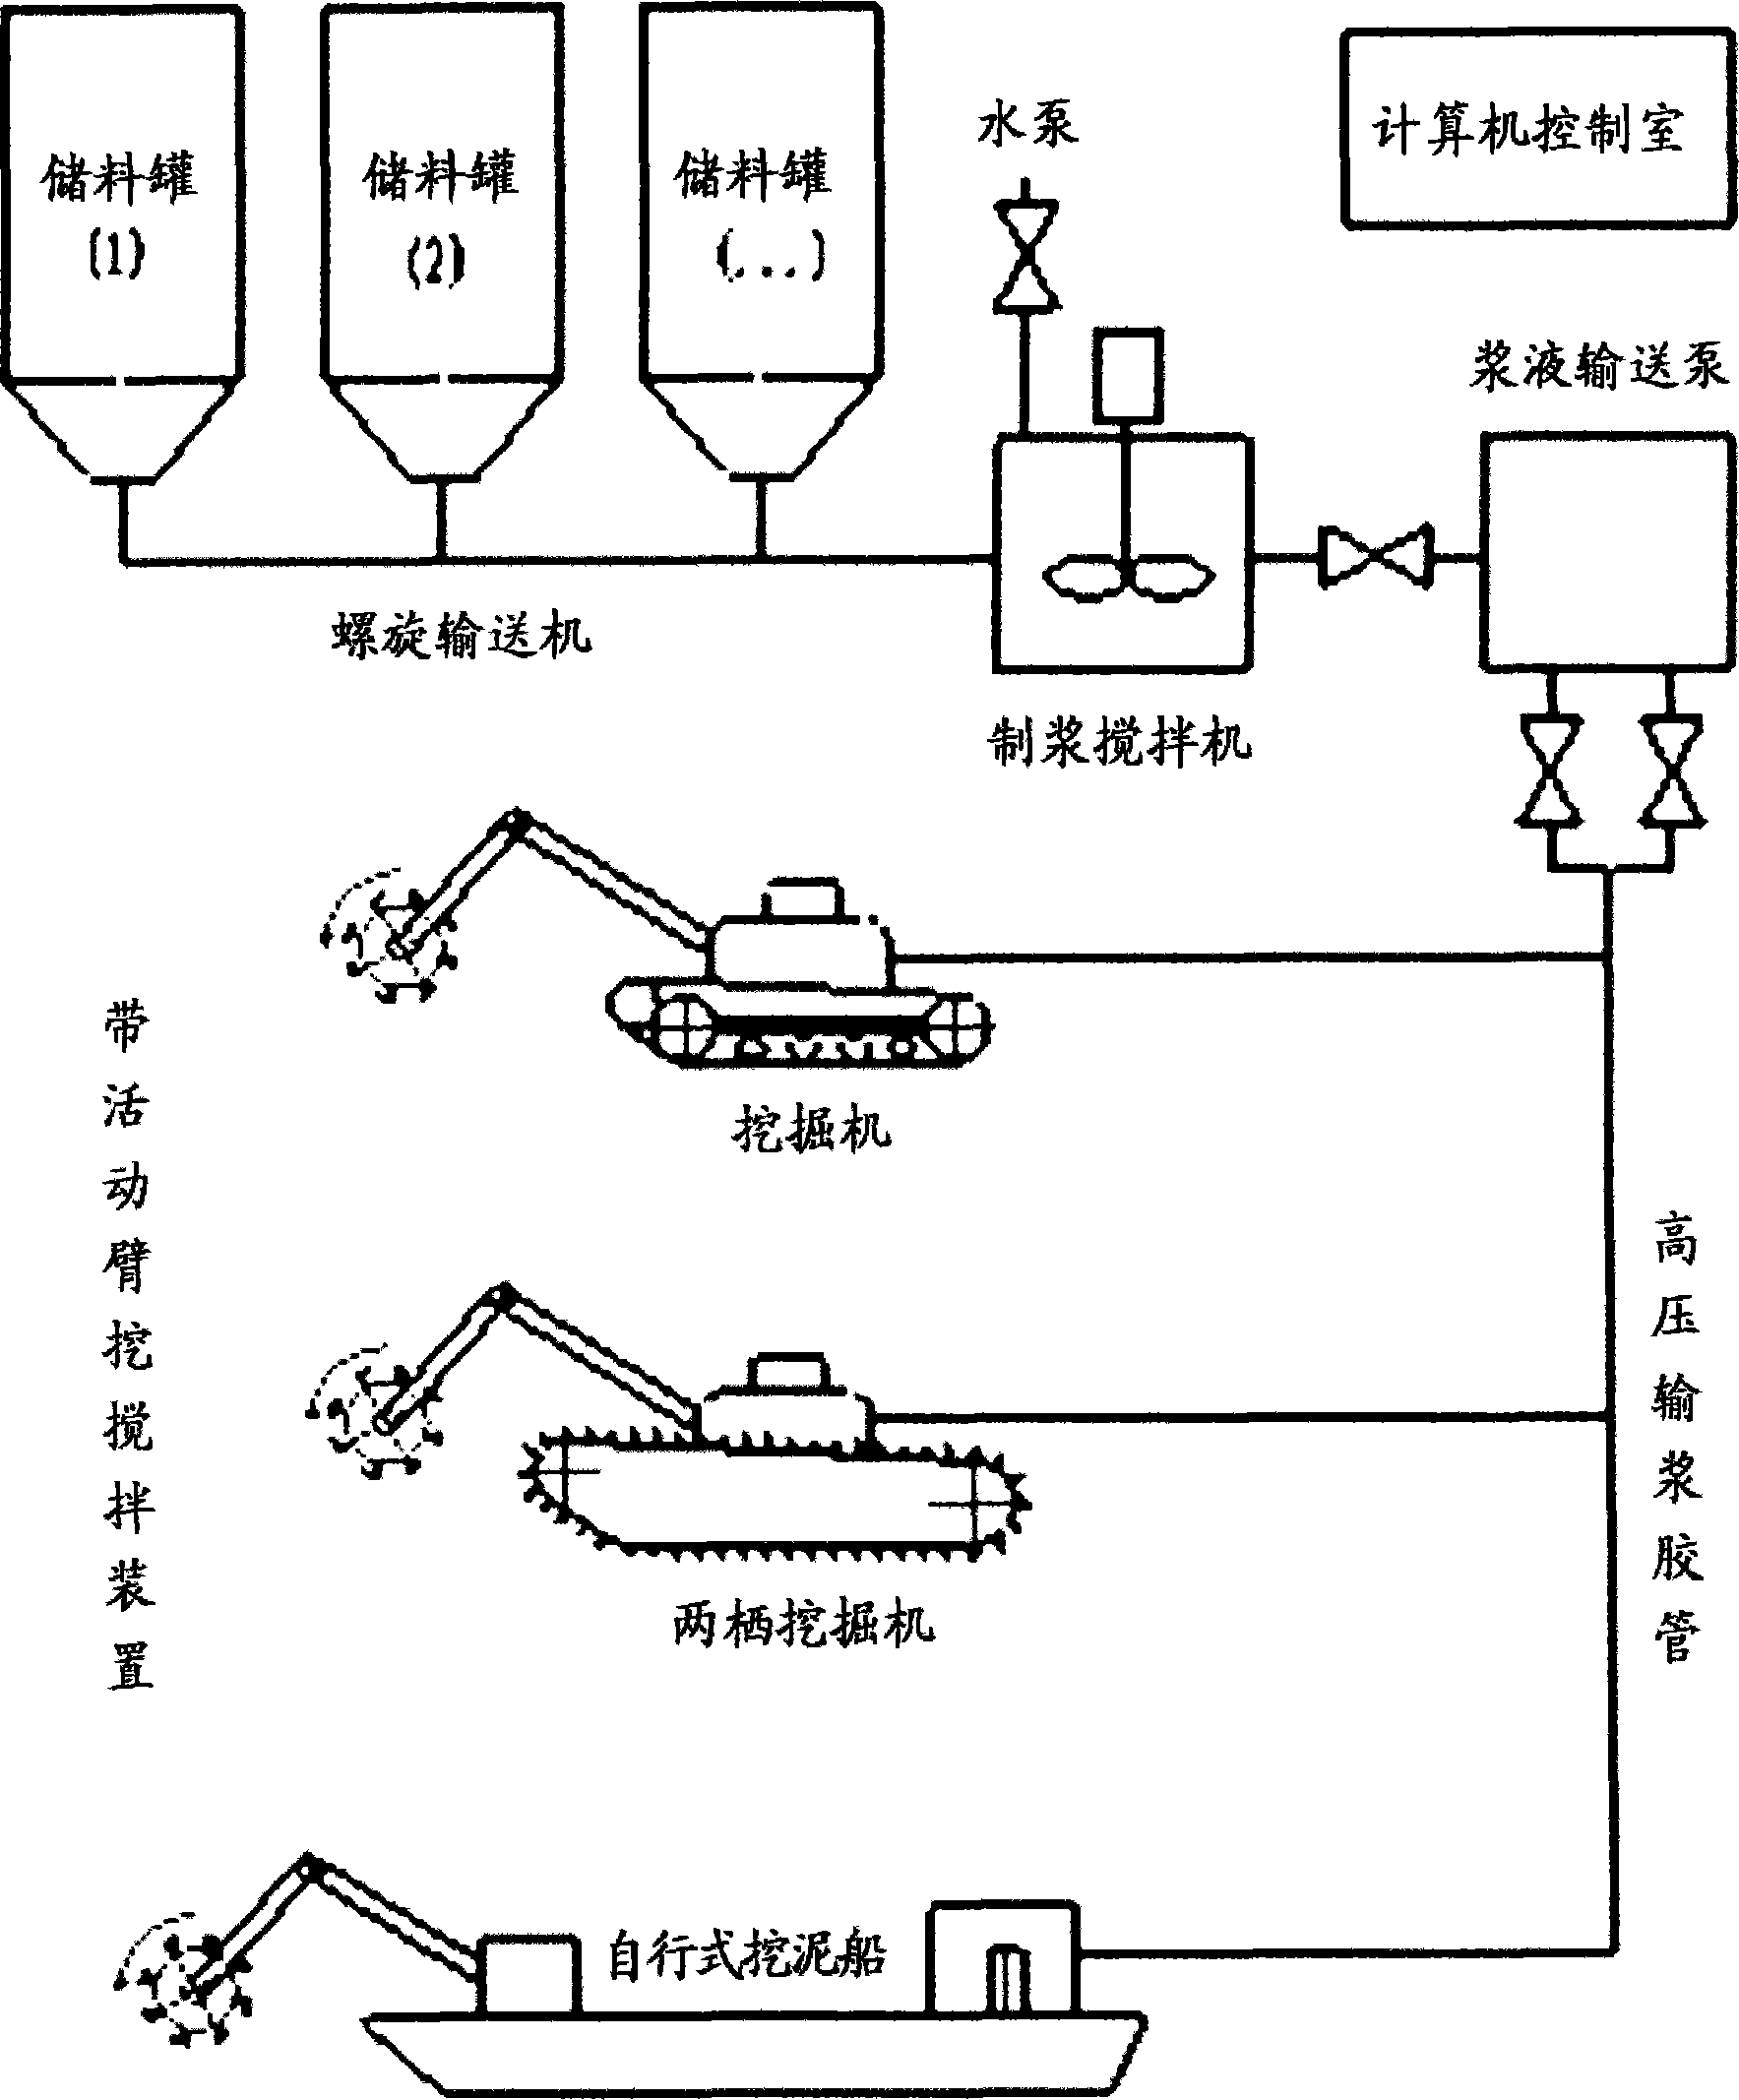 Construction method for treating soft soil foundation by solidifying agent